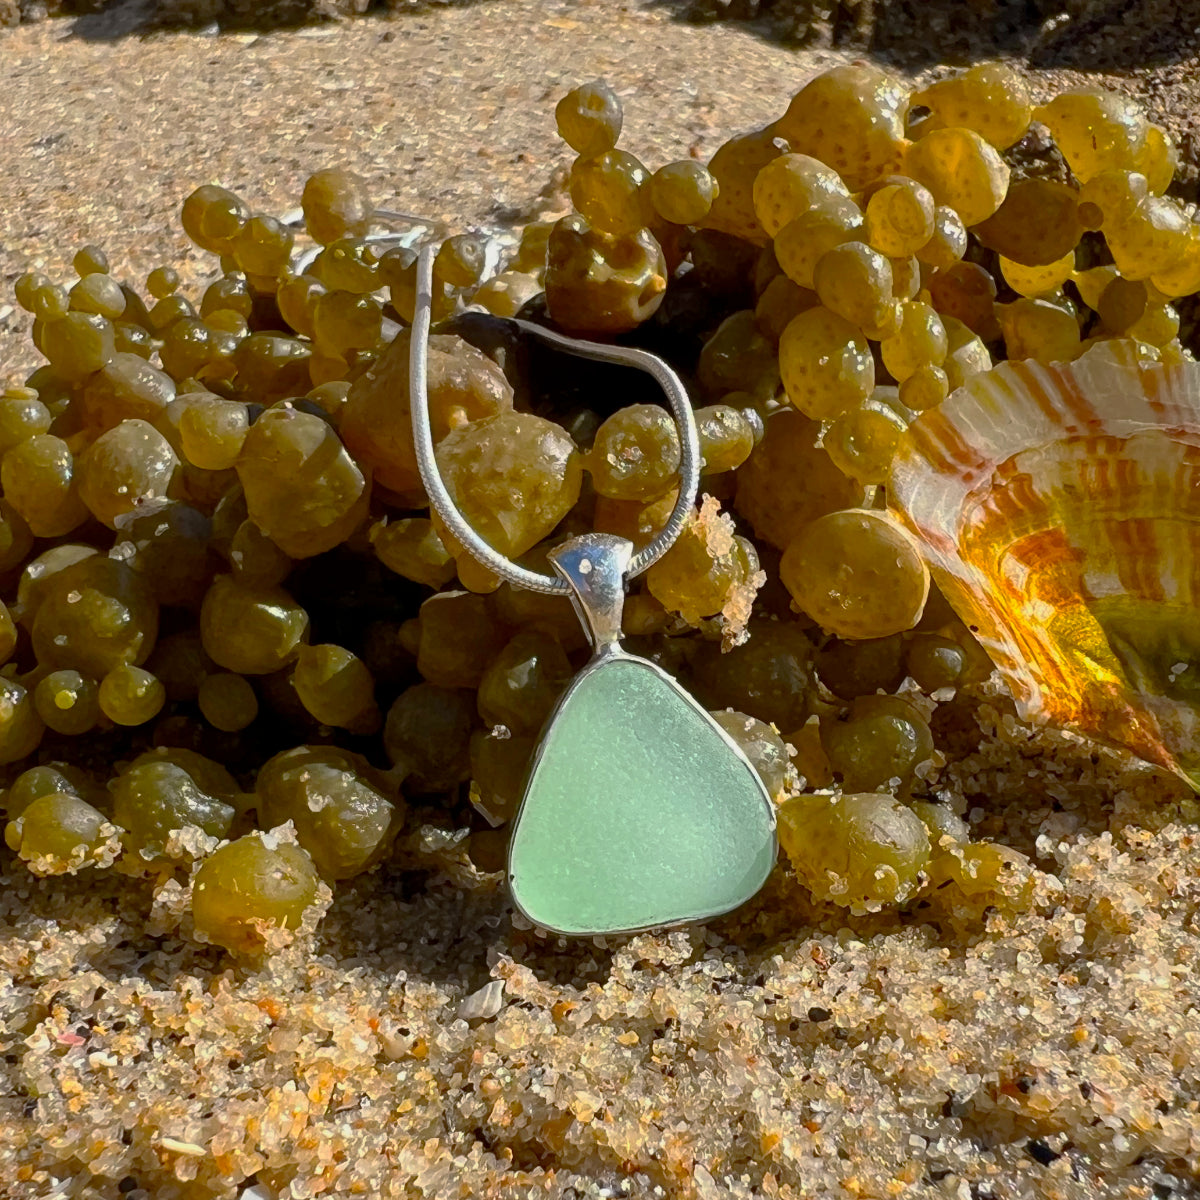 Soft seafoam green sea glass set in silver pendant by Mornington Sea Glass. Comes with a 40 or 45cm sterling silver snake chain